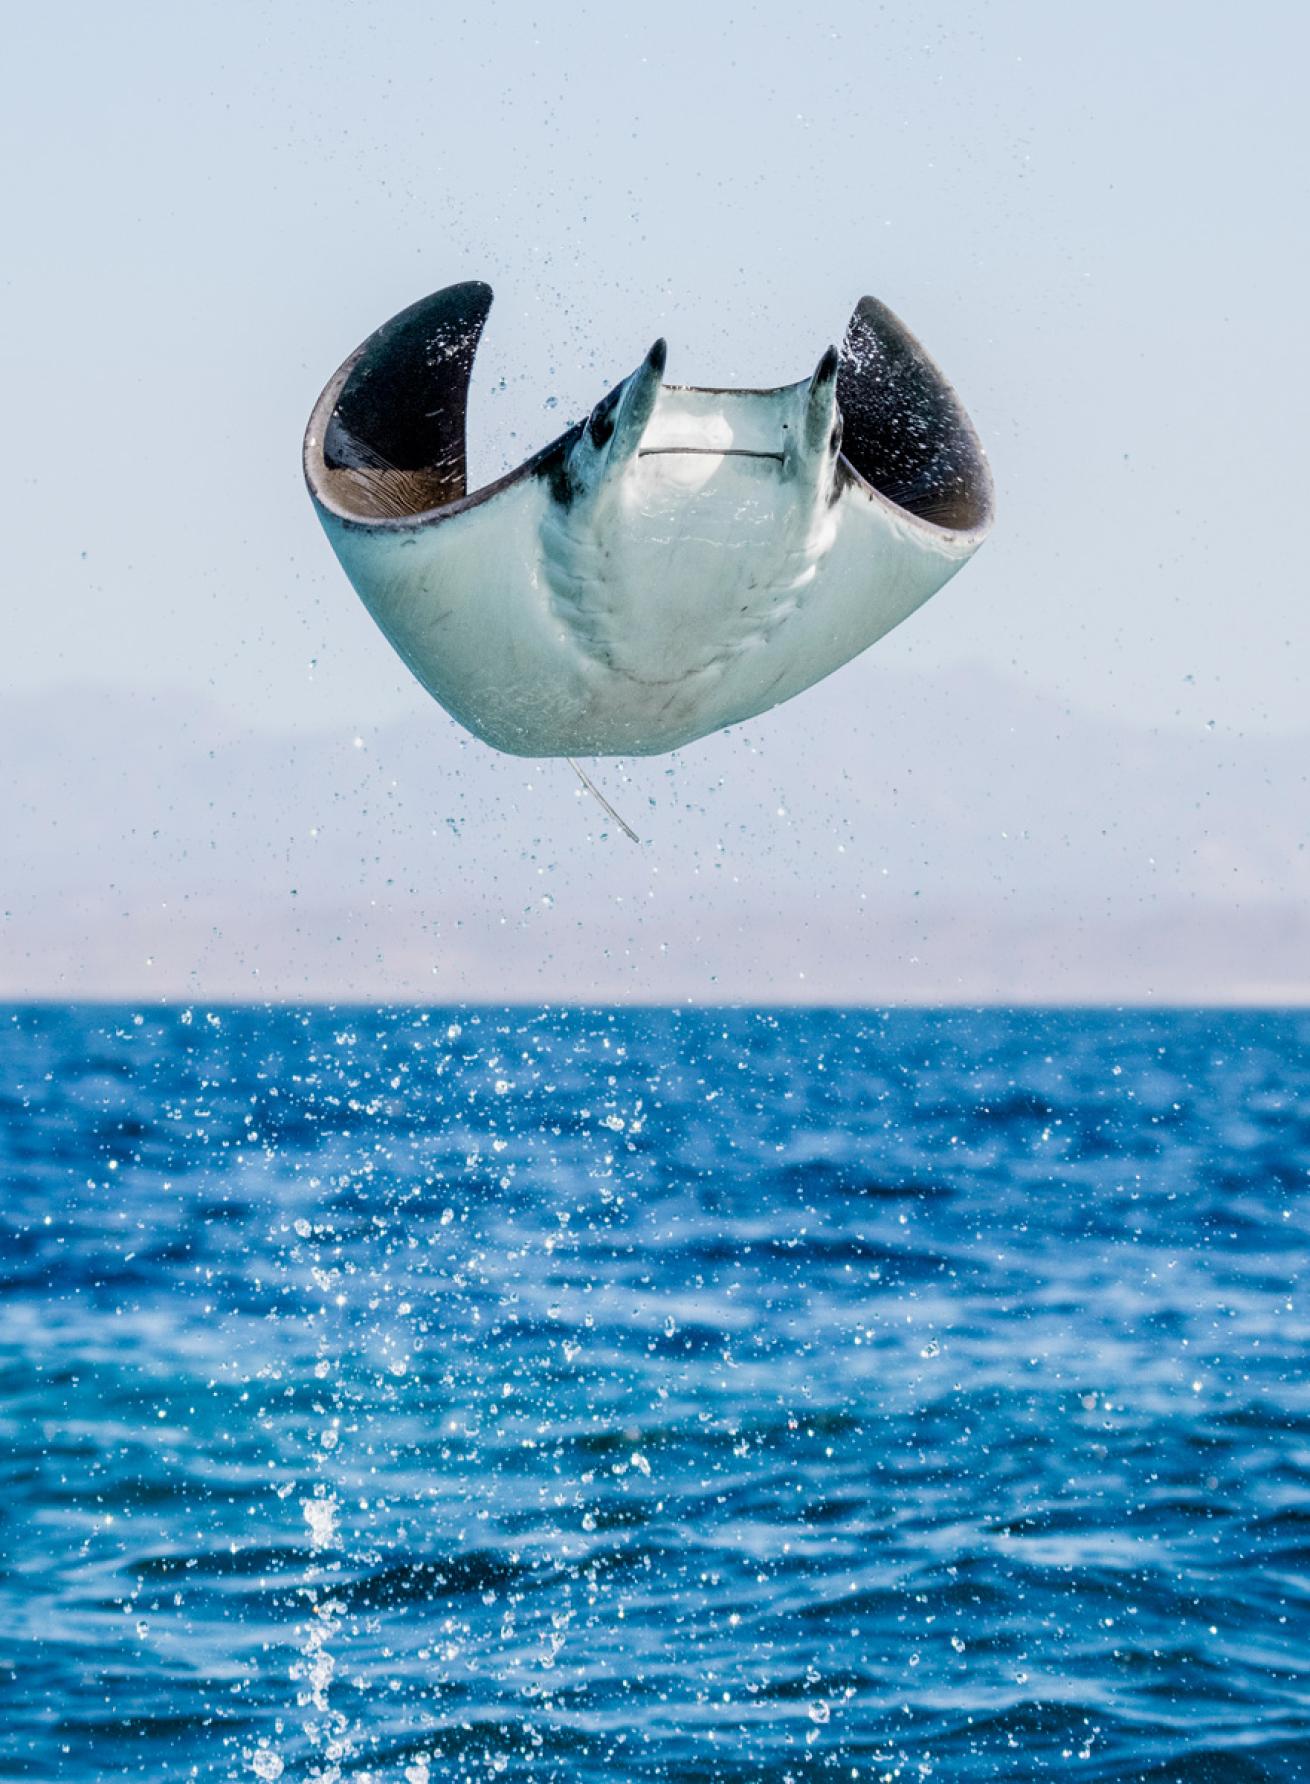 Mobula rays leap from the water, reaching heights of up to 10 feet. 